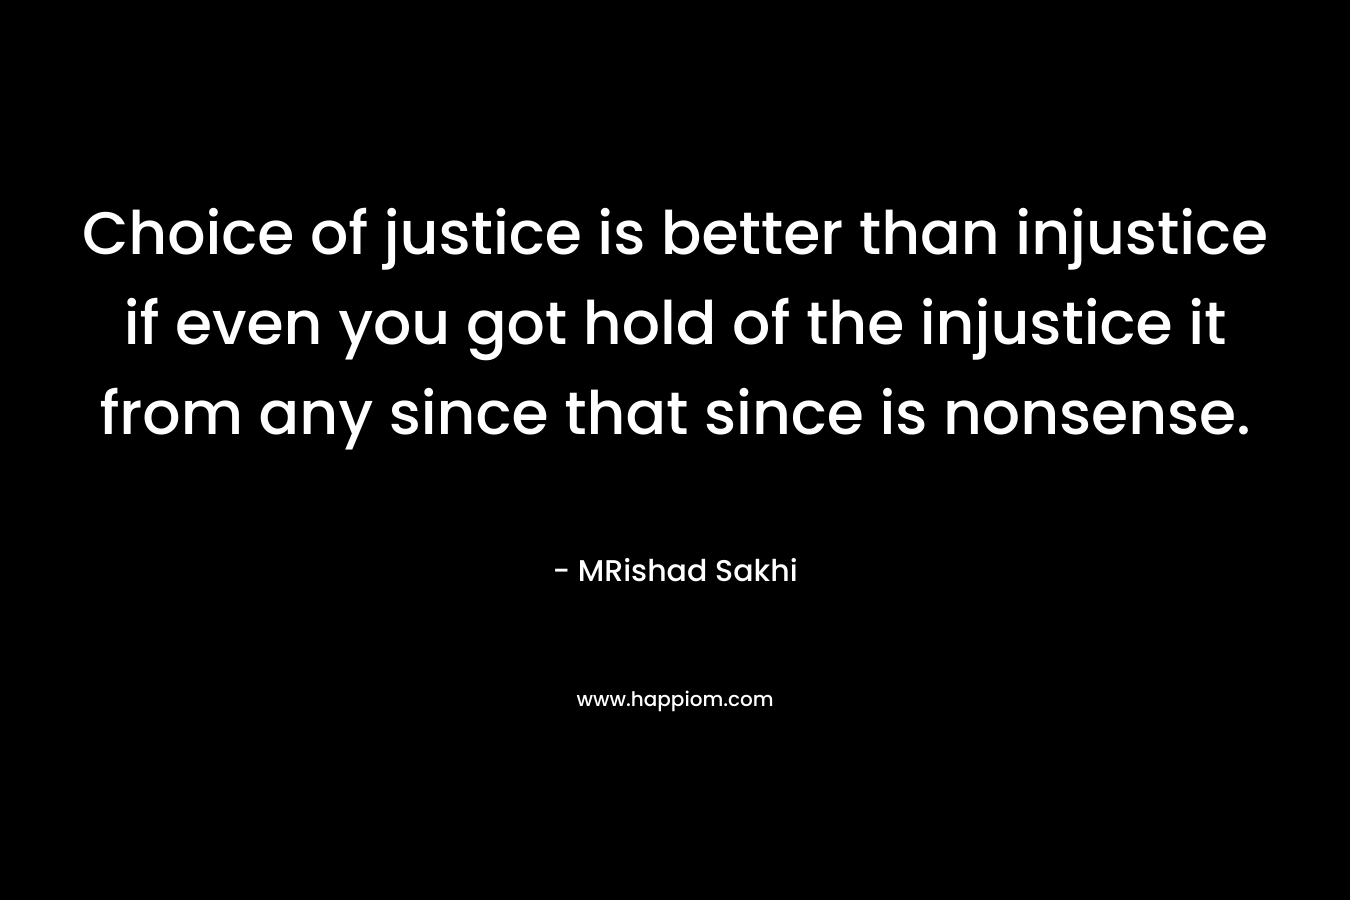 Choice of justice is better than injustice if even you got hold of the injustice it from any since that since is nonsense.